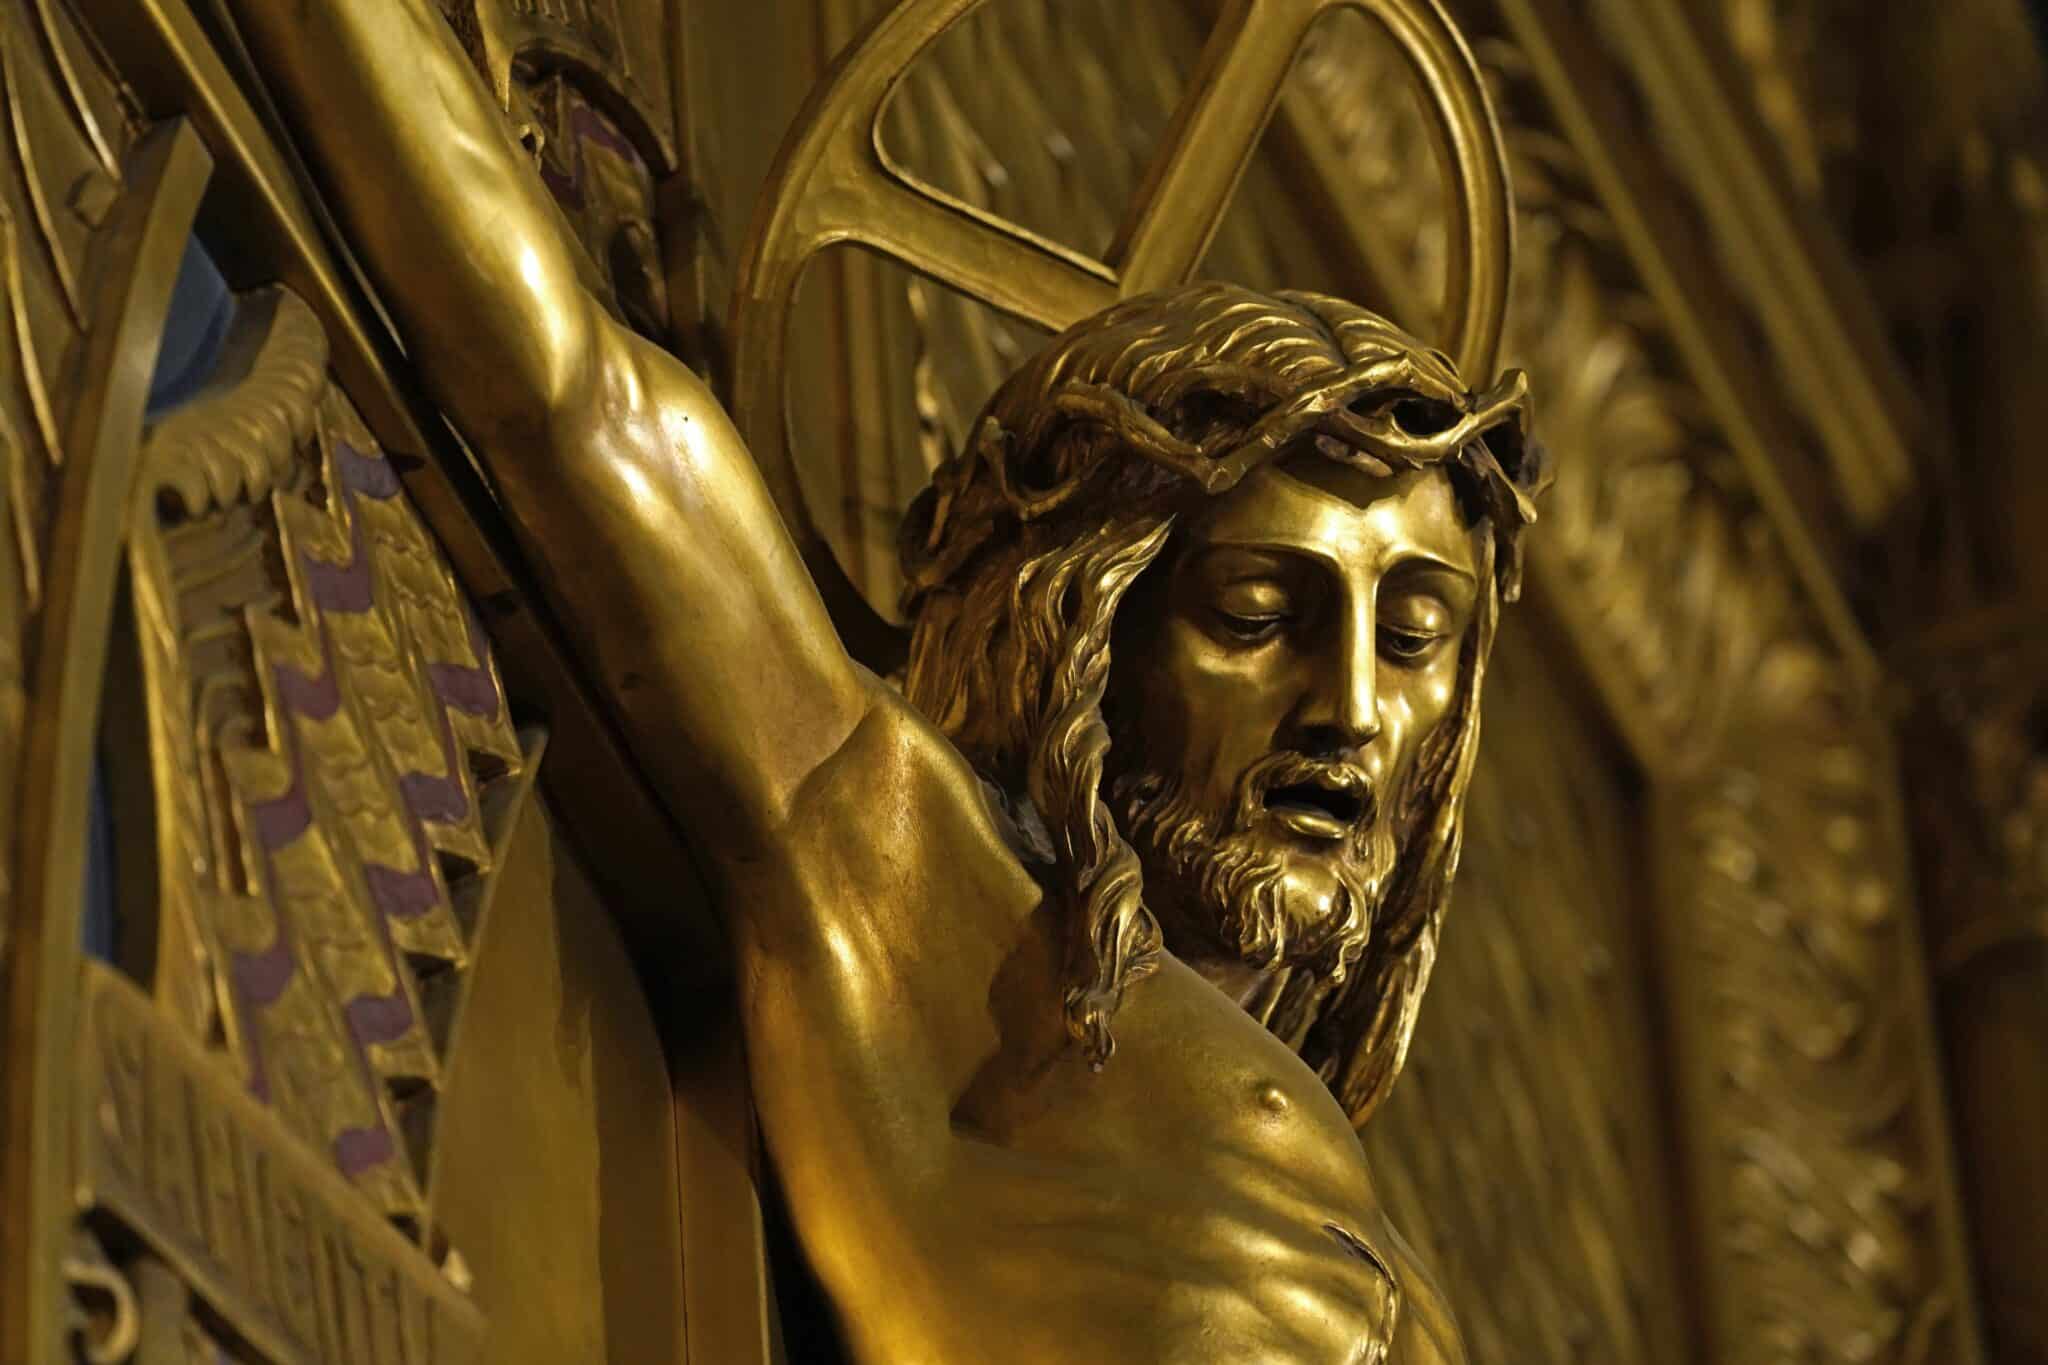 Christ's crucifixion is depicted in the chapel reredos at Immaculate Conception Seminary in Huntington, N.Y. (OSV News photo/Gregory A. Shemitz)